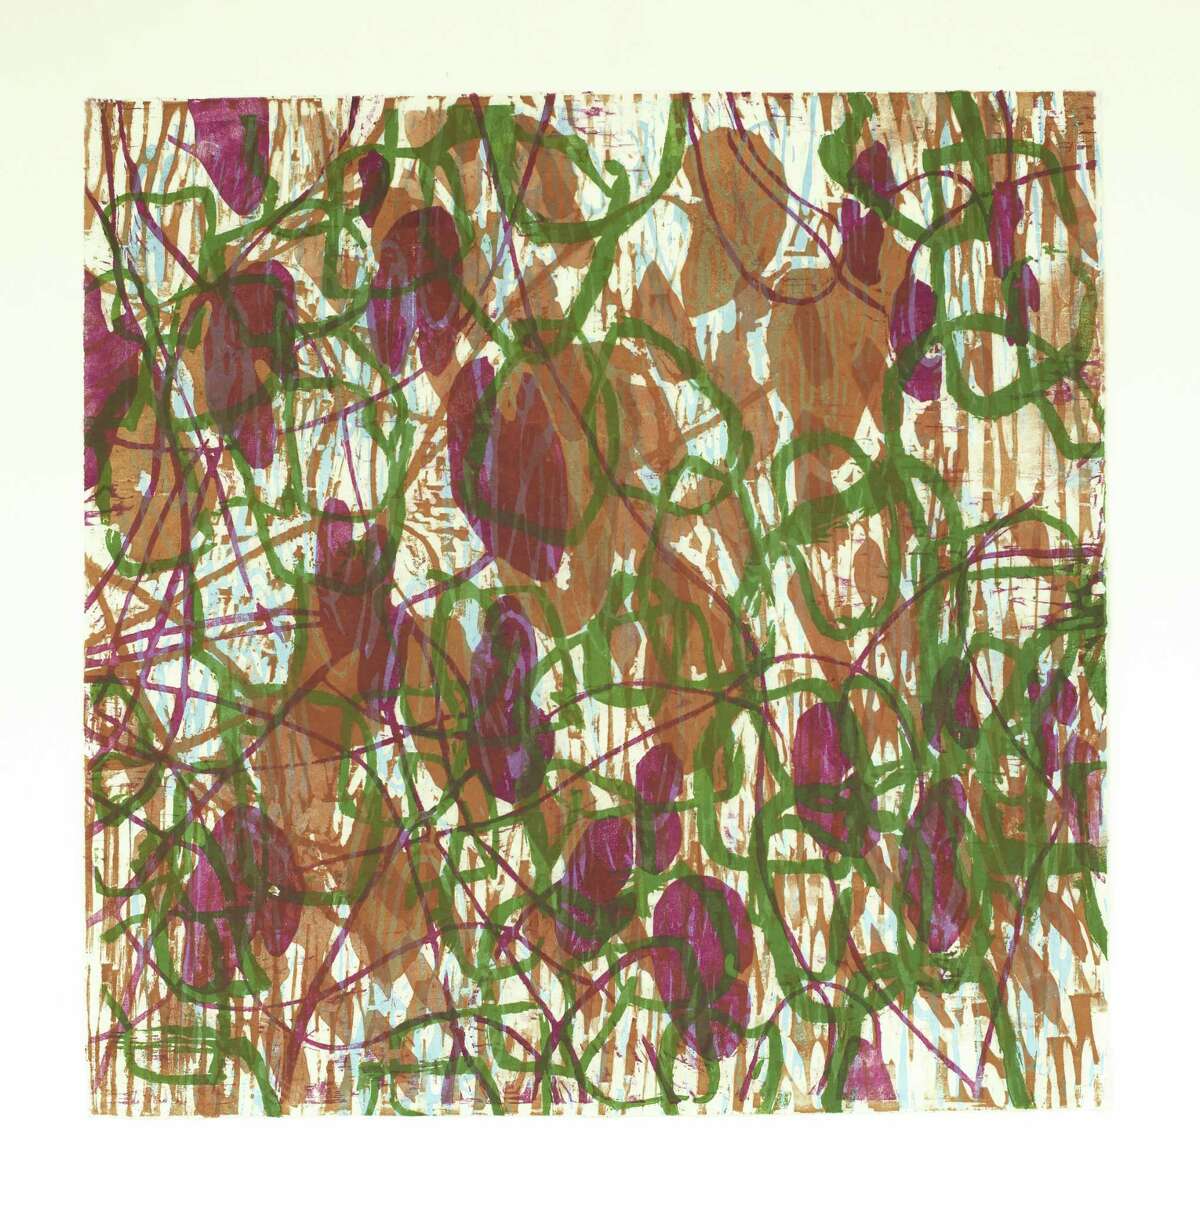 The Washington Art Association & Gallery presents "On The Edge," an exhibition featuring monoprints by John Thompson, on view from Oct. 14 to Nov. 10.